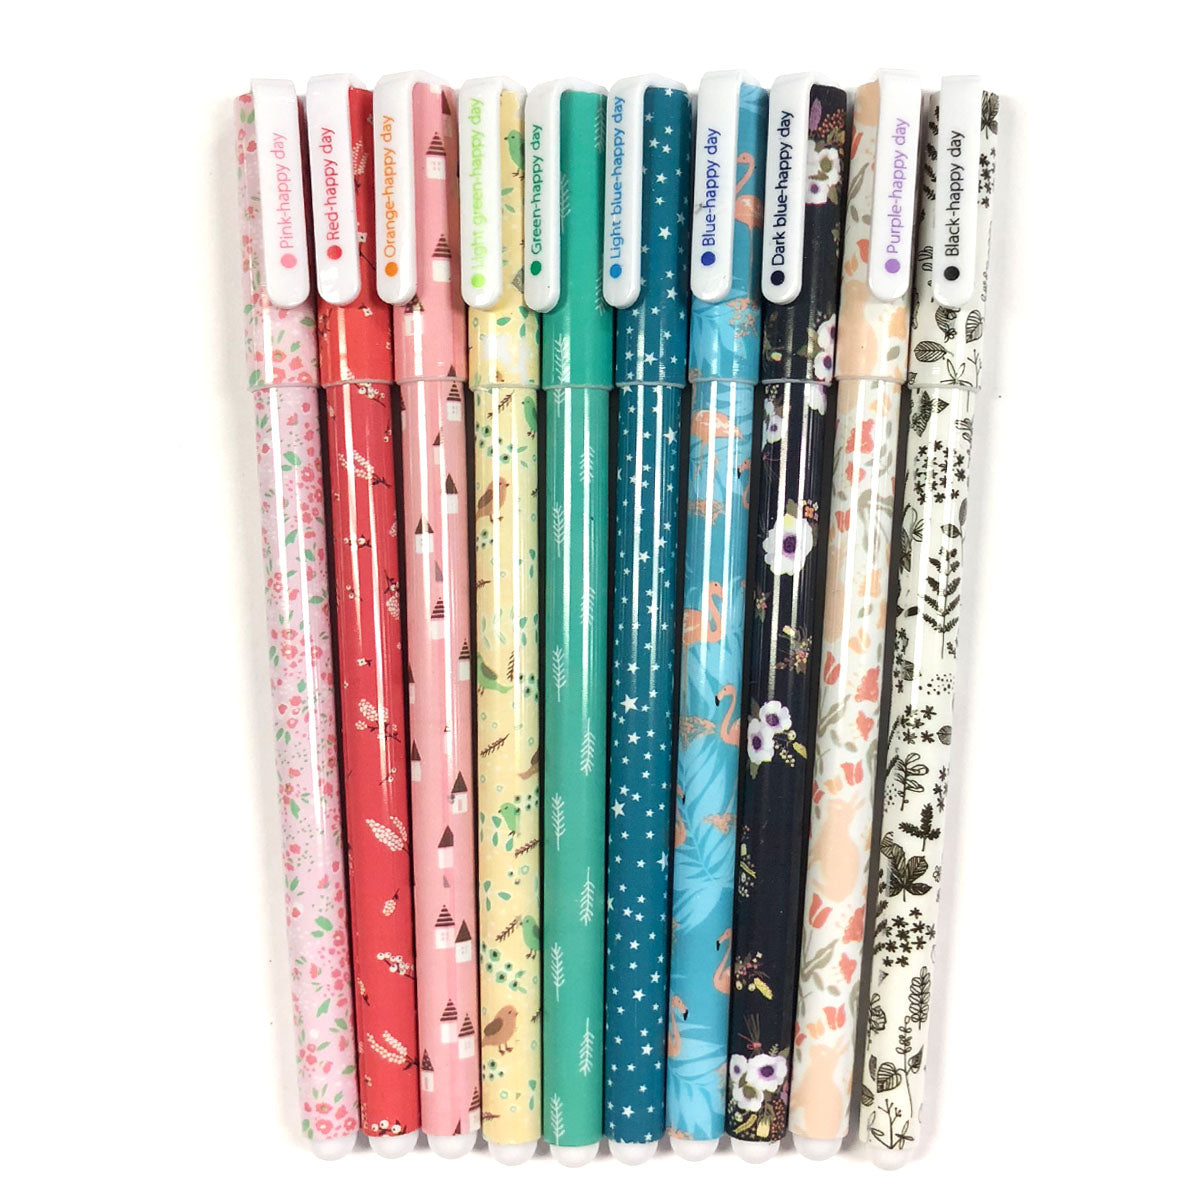 Wrapables Cute Novelty Gel Ink Pens, 0.5mm Fine Point (Set of 10) for School, Office, Stationery